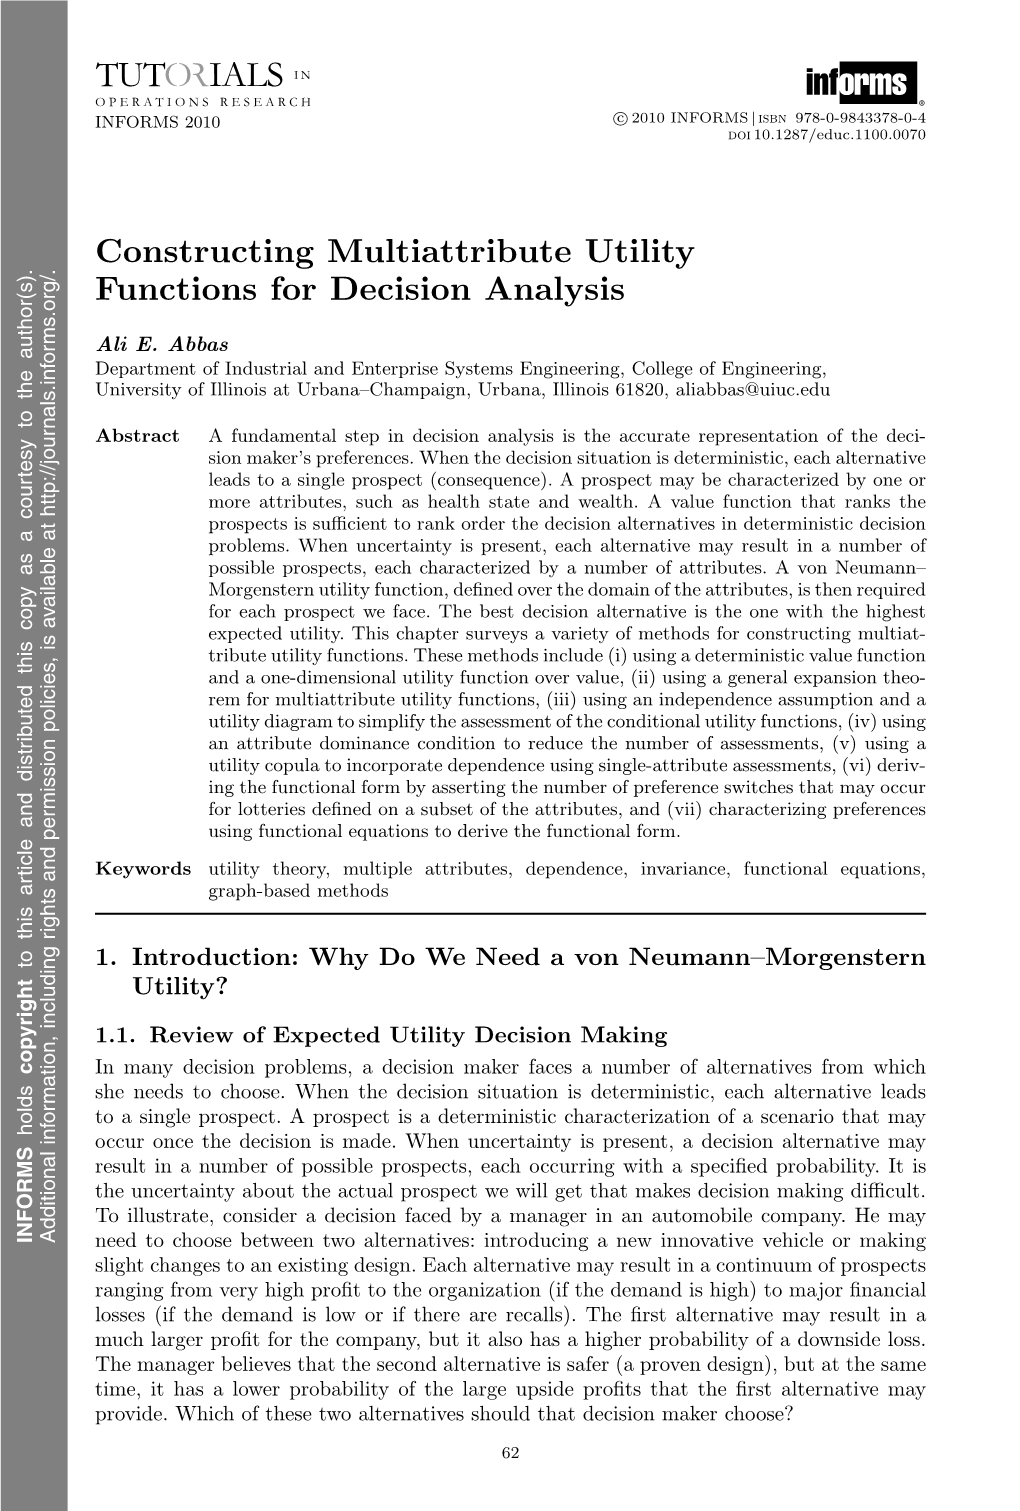 Constructing Multiattribute Utility Functions for Decision Analysis